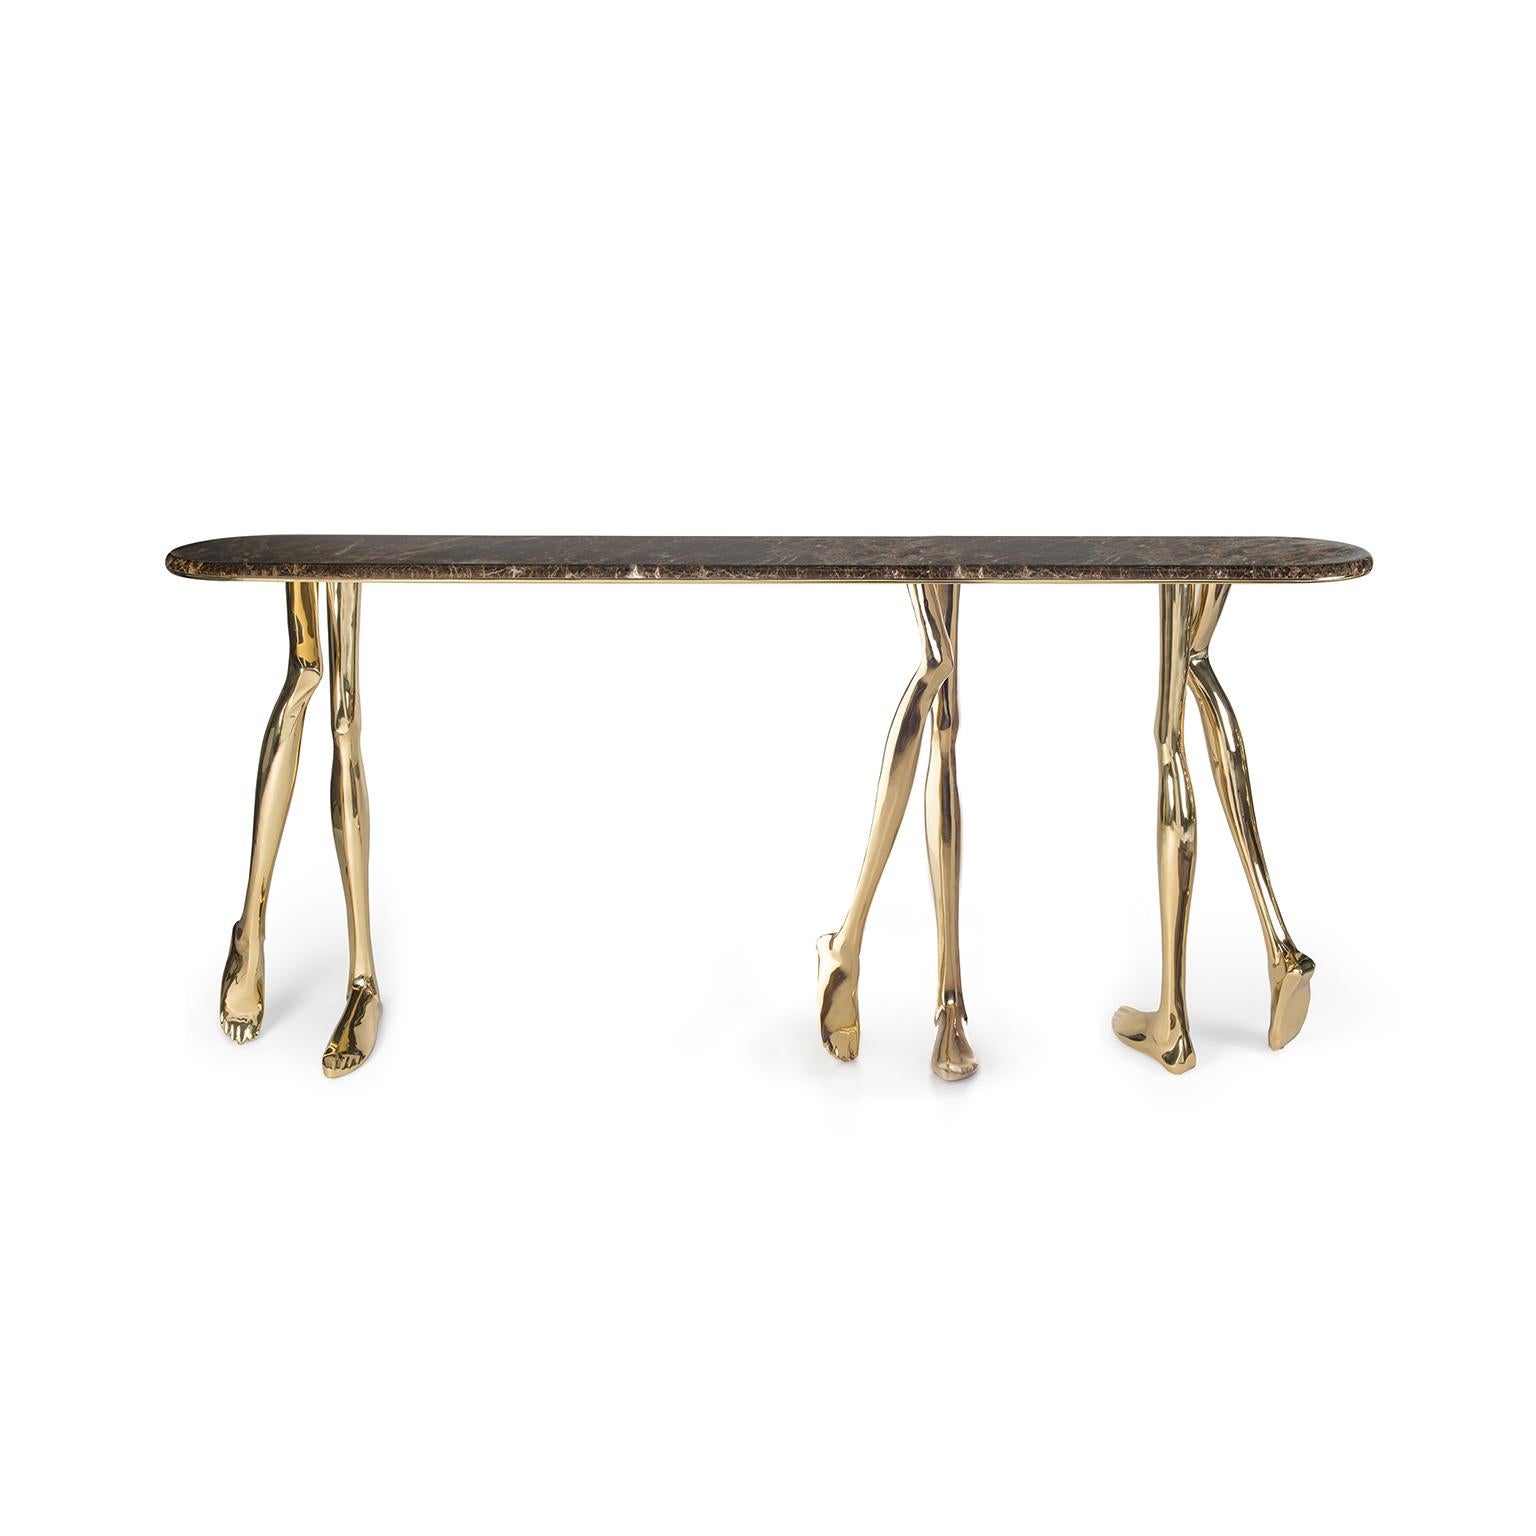 Inspiration:  
After the great success of the Monroe console launched in 2018, Bessa created a new version of this unique piece.
 
